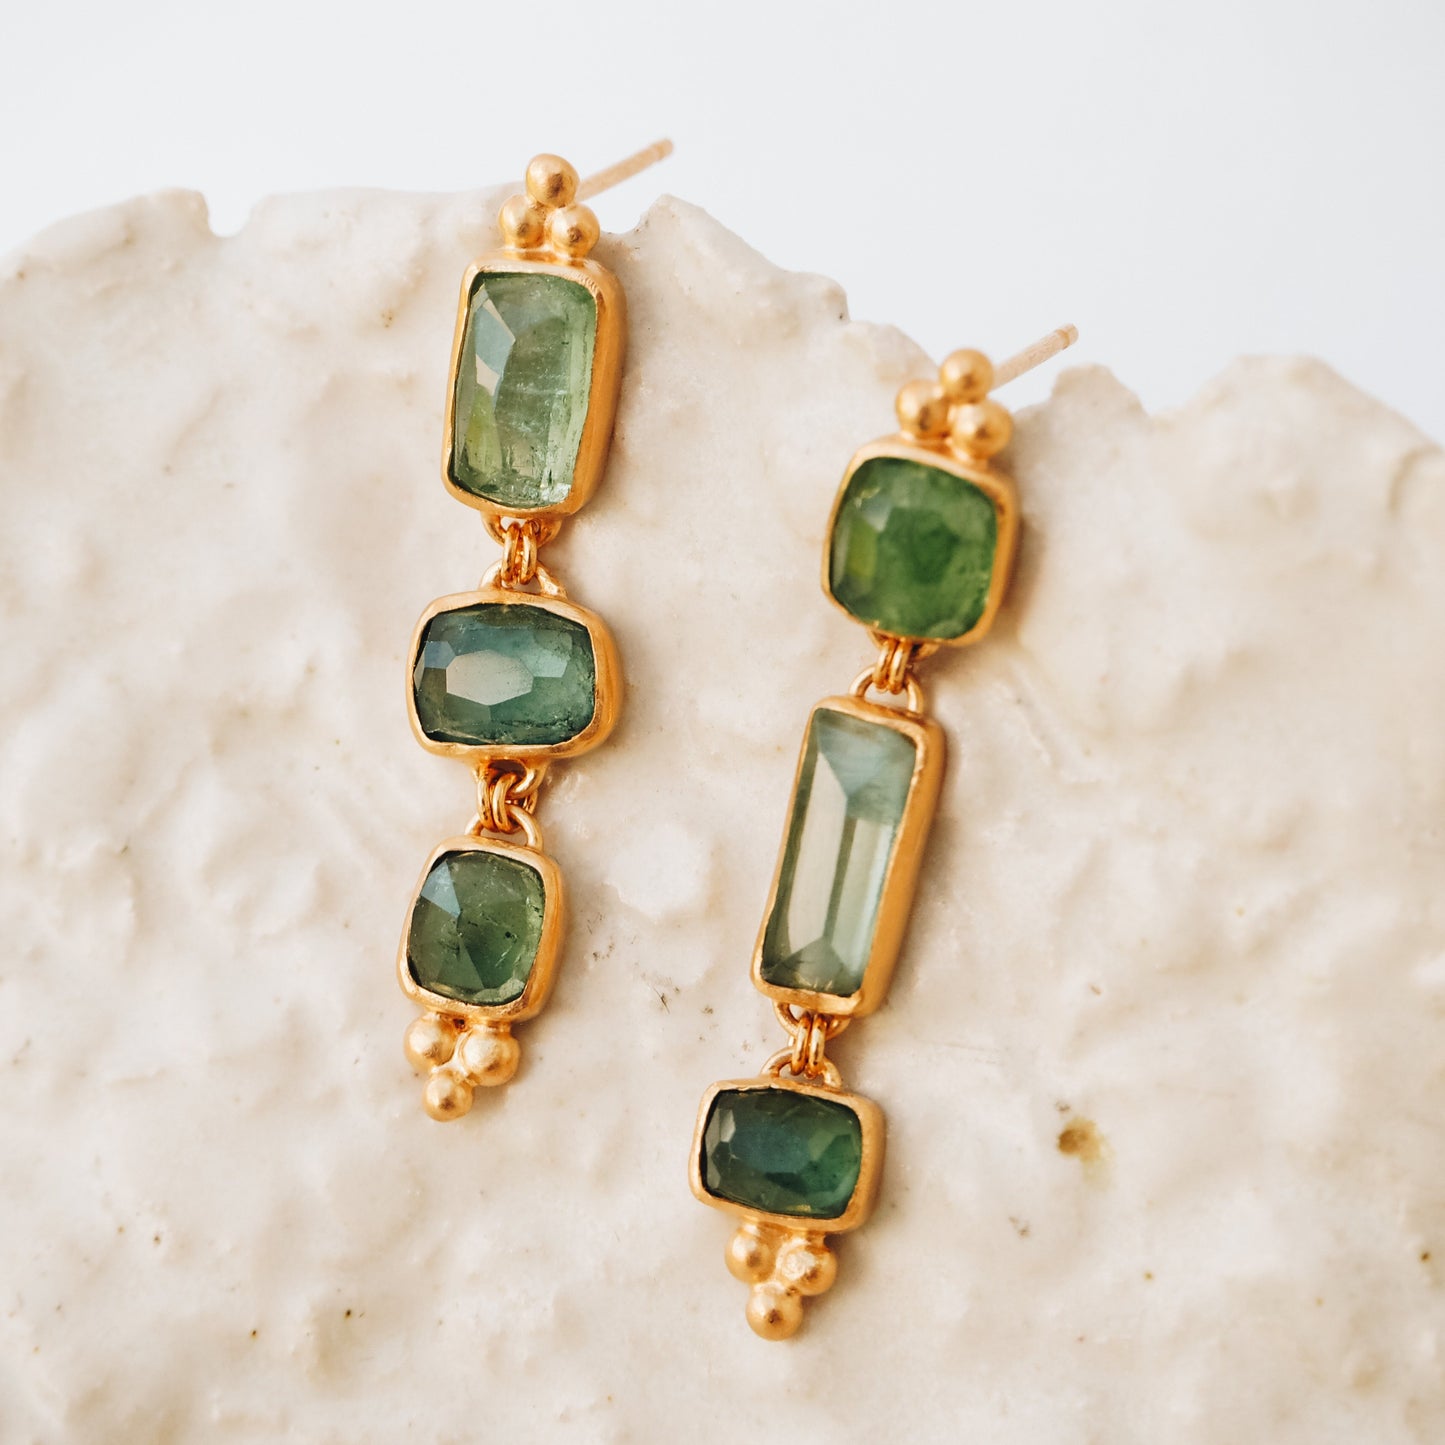 One-of-a-kind gold earrings with dainty square rose cut tourmaline gemstone drops in ocean blue and green, adorned with intricate granulation accents.